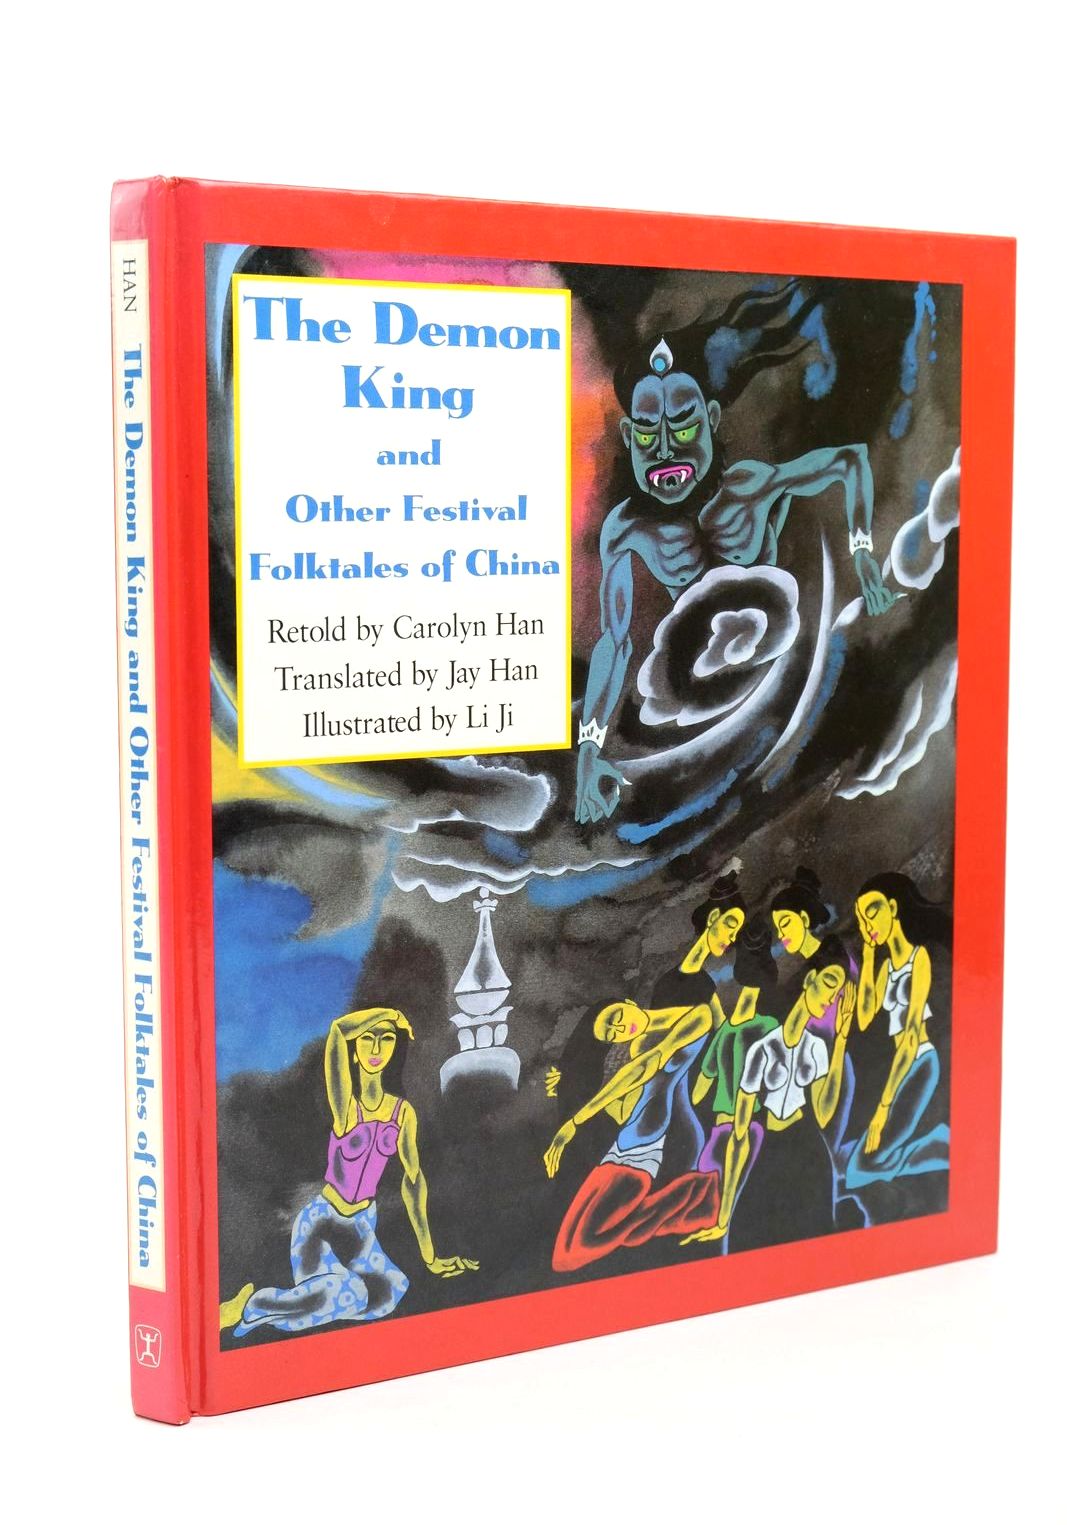 Photo of THE DEMON KING AND OTHER FESTIVAL FOLKTALES OF CHINA written by Han, Carolyn Han, Jay illustrated by Ji, Li published by University of Hawaii Press (STOCK CODE: 1323026)  for sale by Stella & Rose's Books